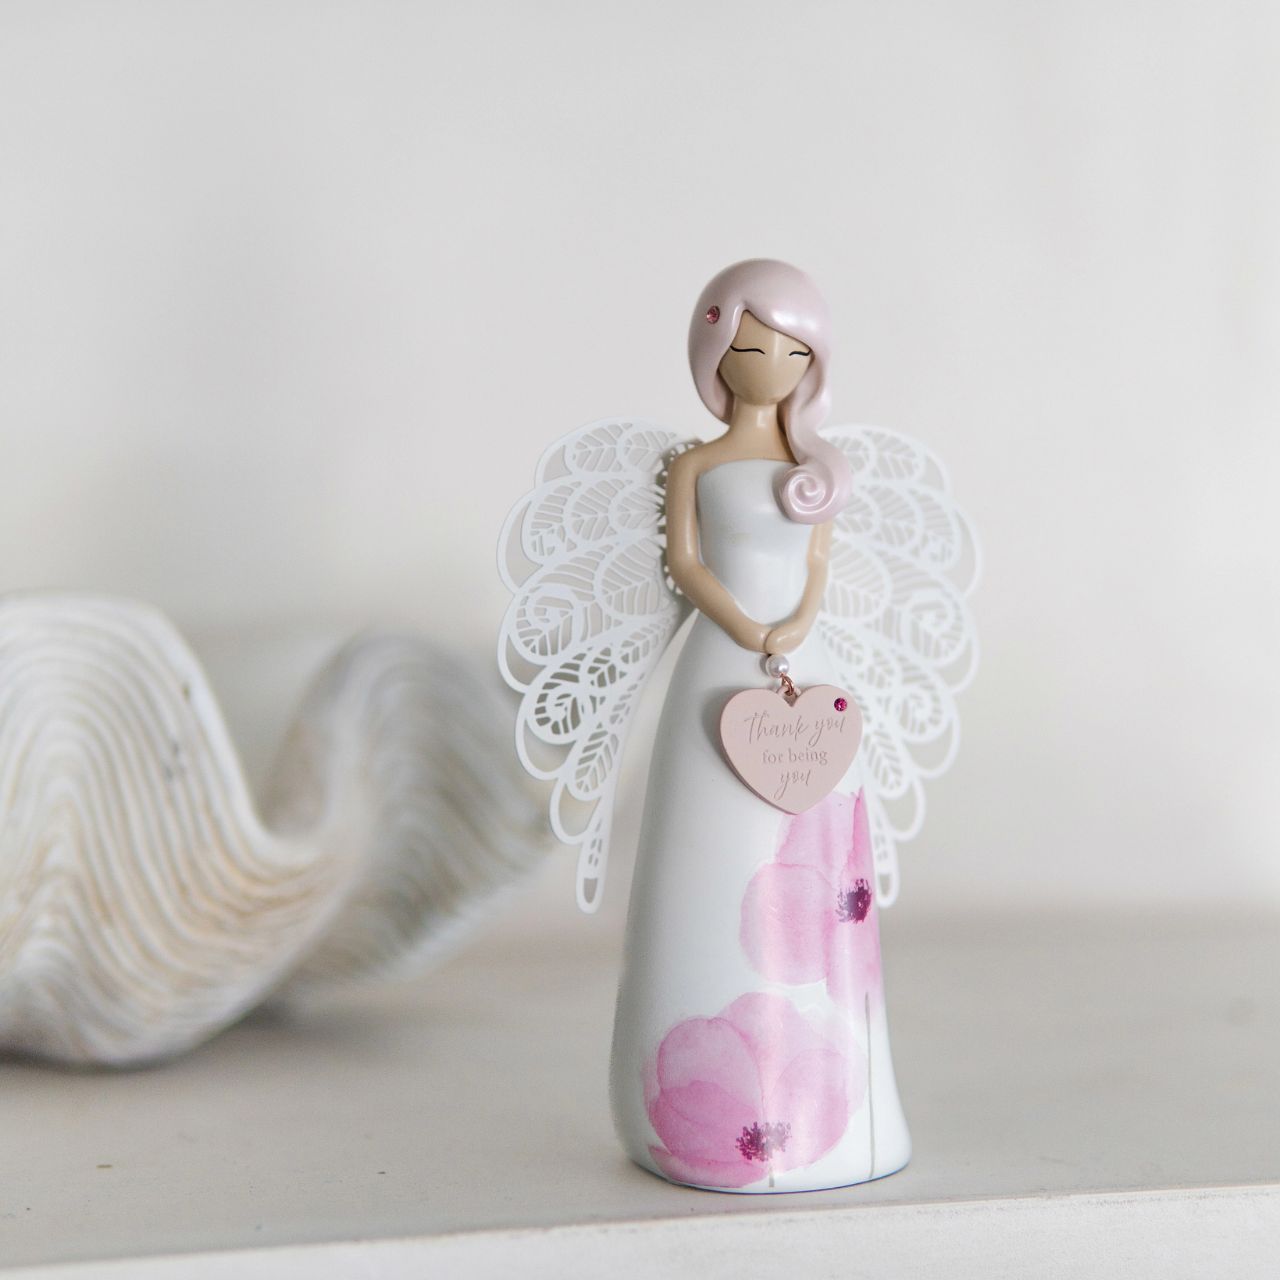 You Are An Angel Thank You Figurine  Looking for a thoughtful gift that's both beautiful and meaningful? These stunning angels are the perfect way to show someone special just how much they mean to you.